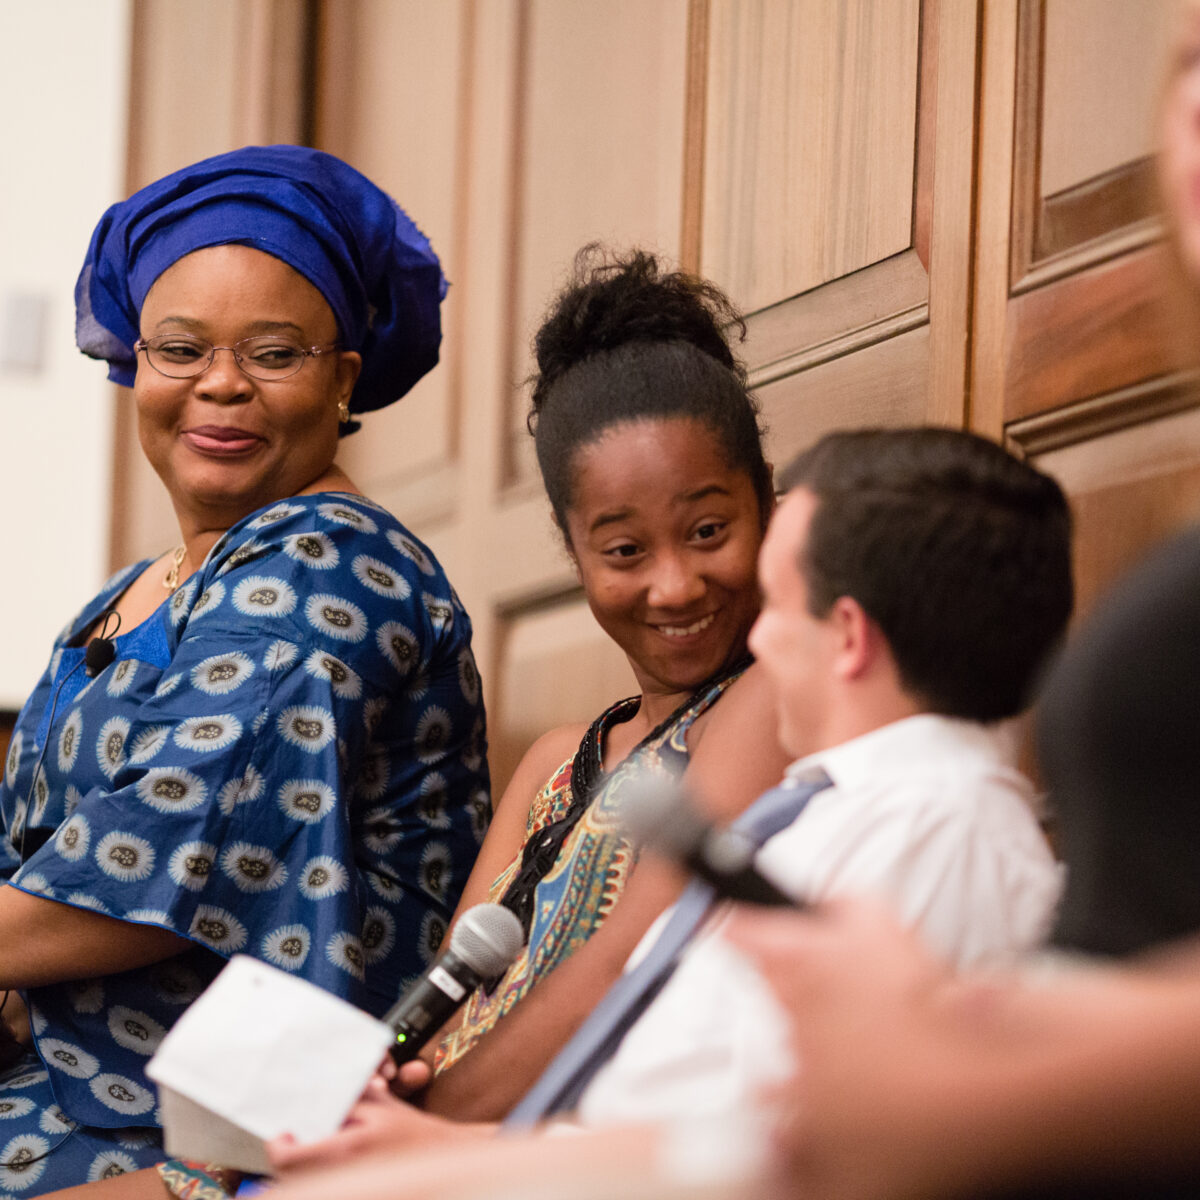 Leymah Gbowee: Leading Change Through Activism — The Liberian Women’s Experience